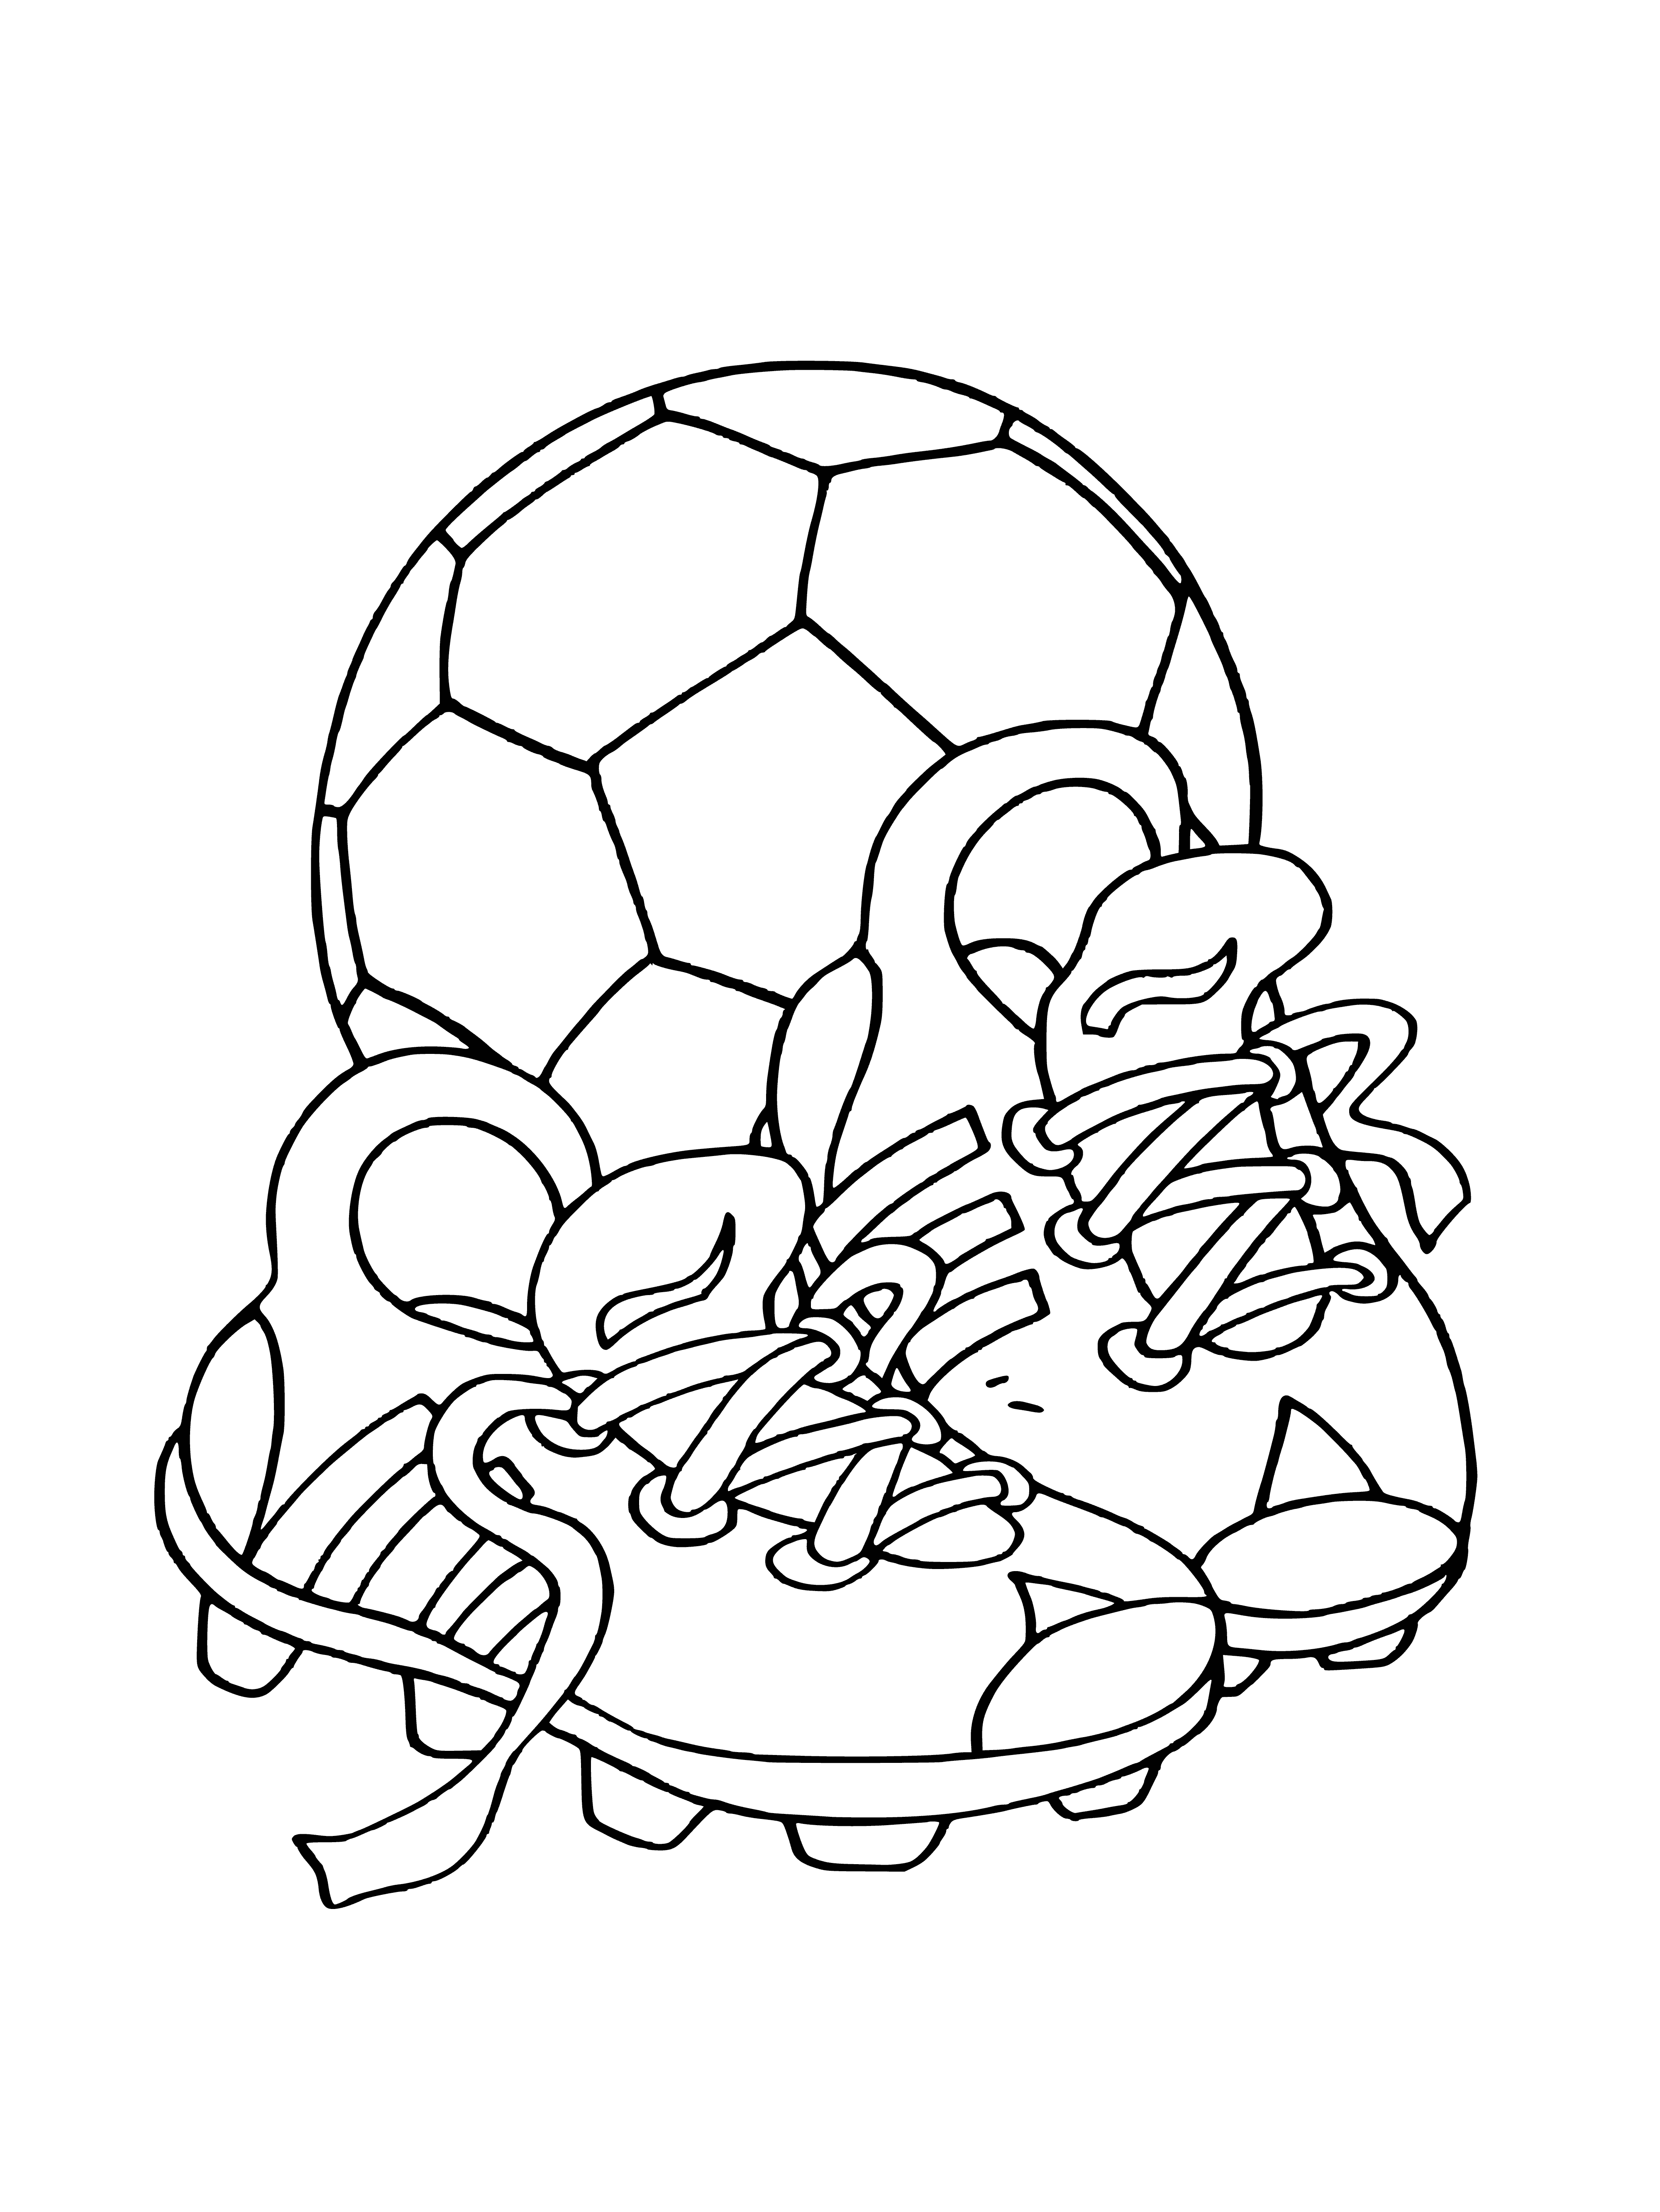 Cleats and soccer ball coloring page